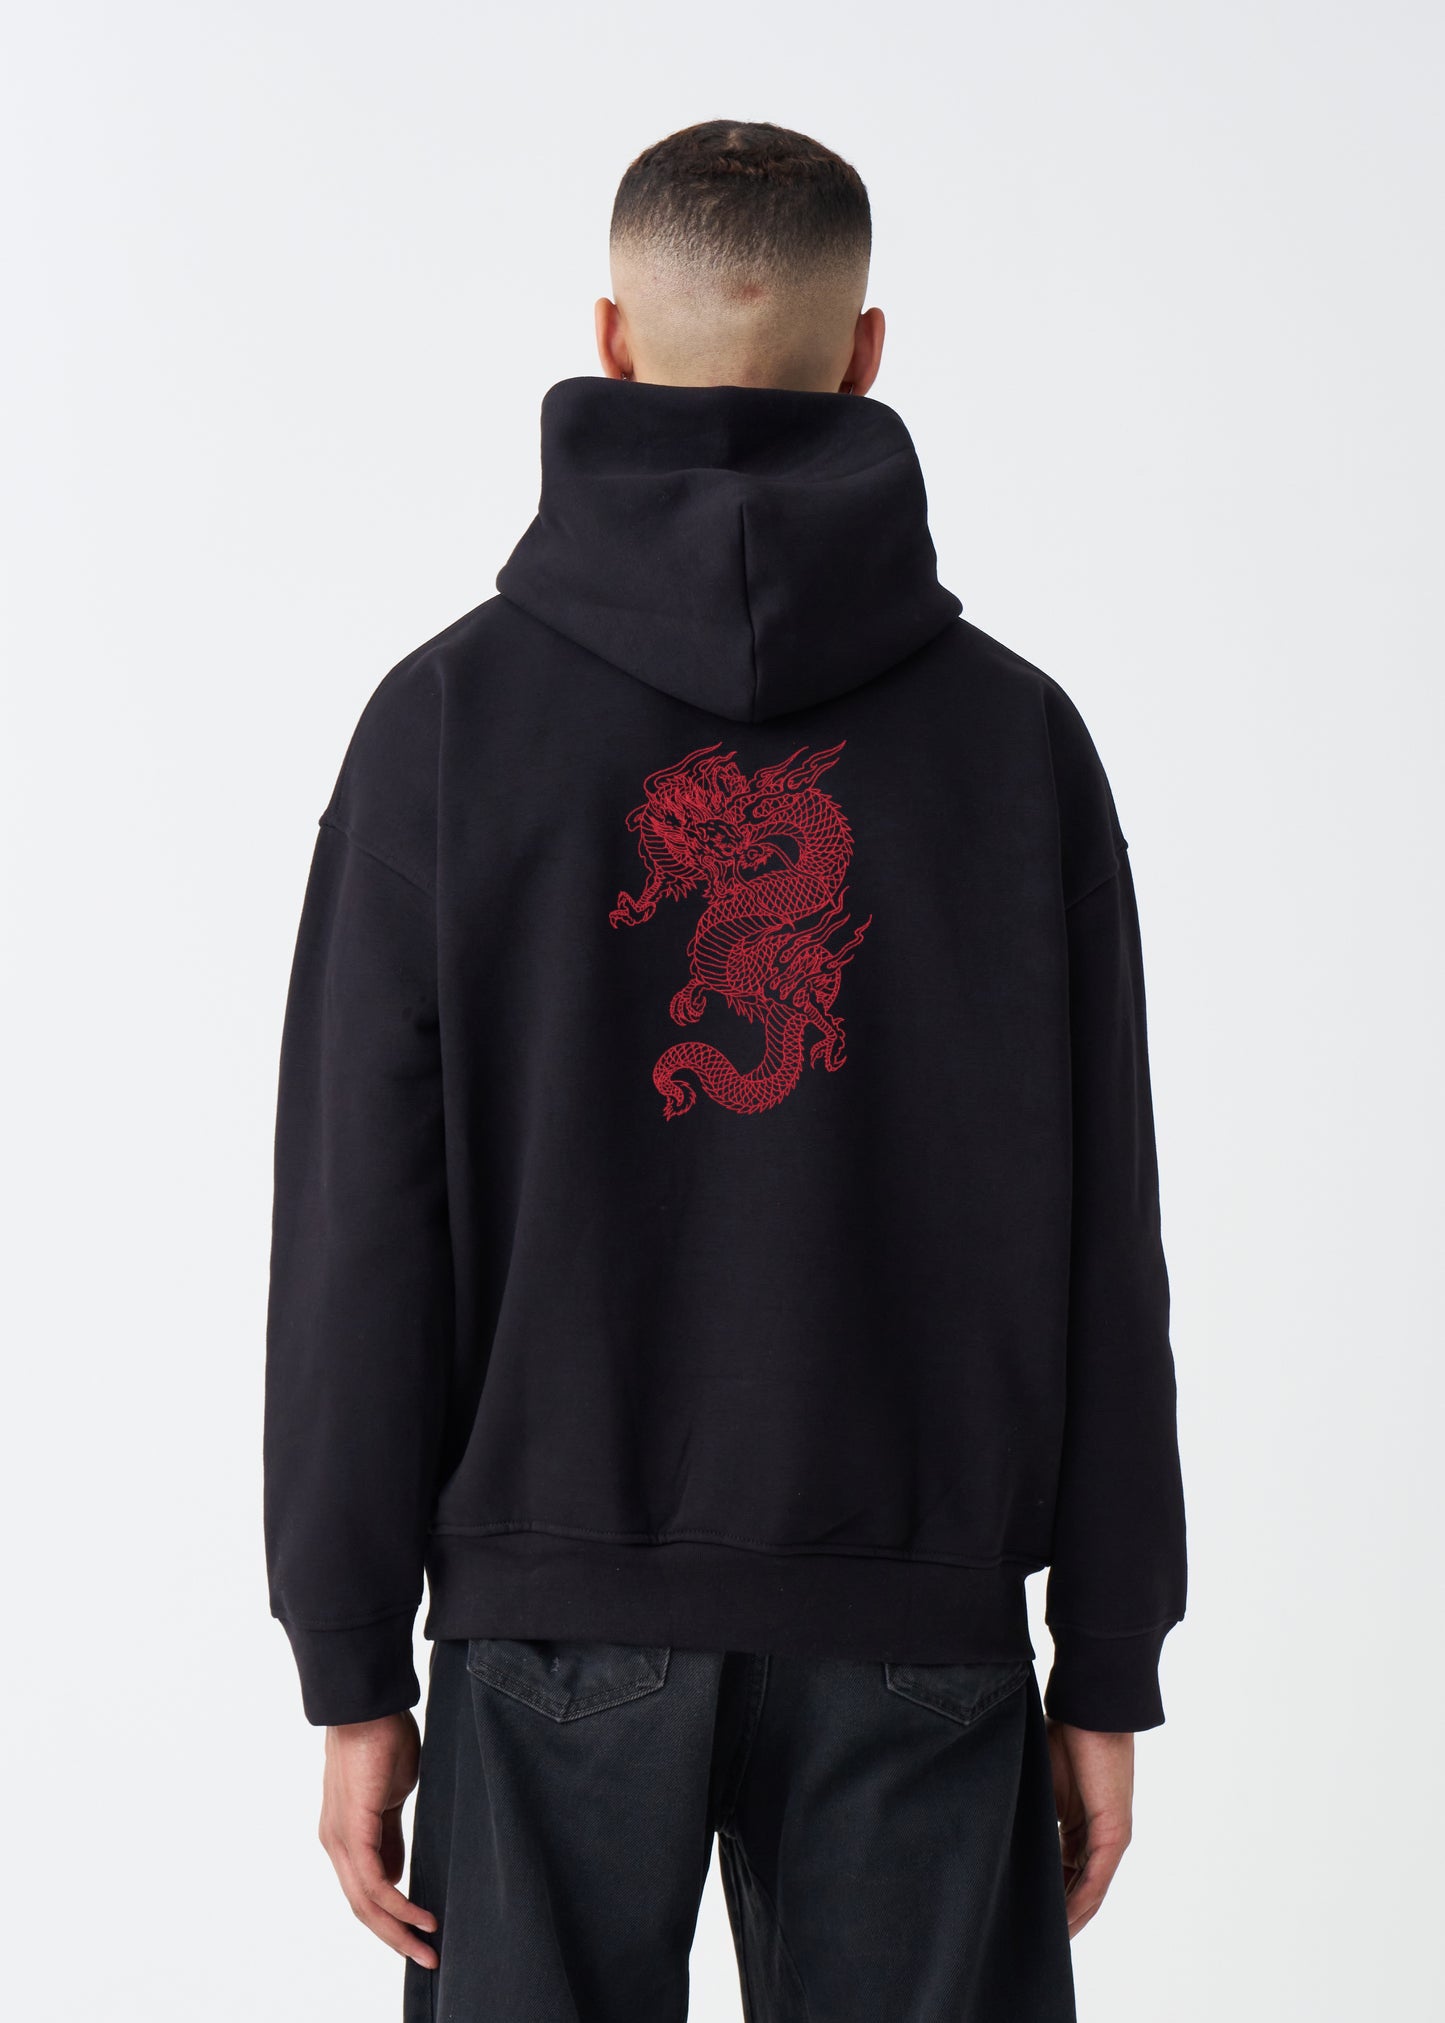 Created by the Dragon Oversized Hoodie